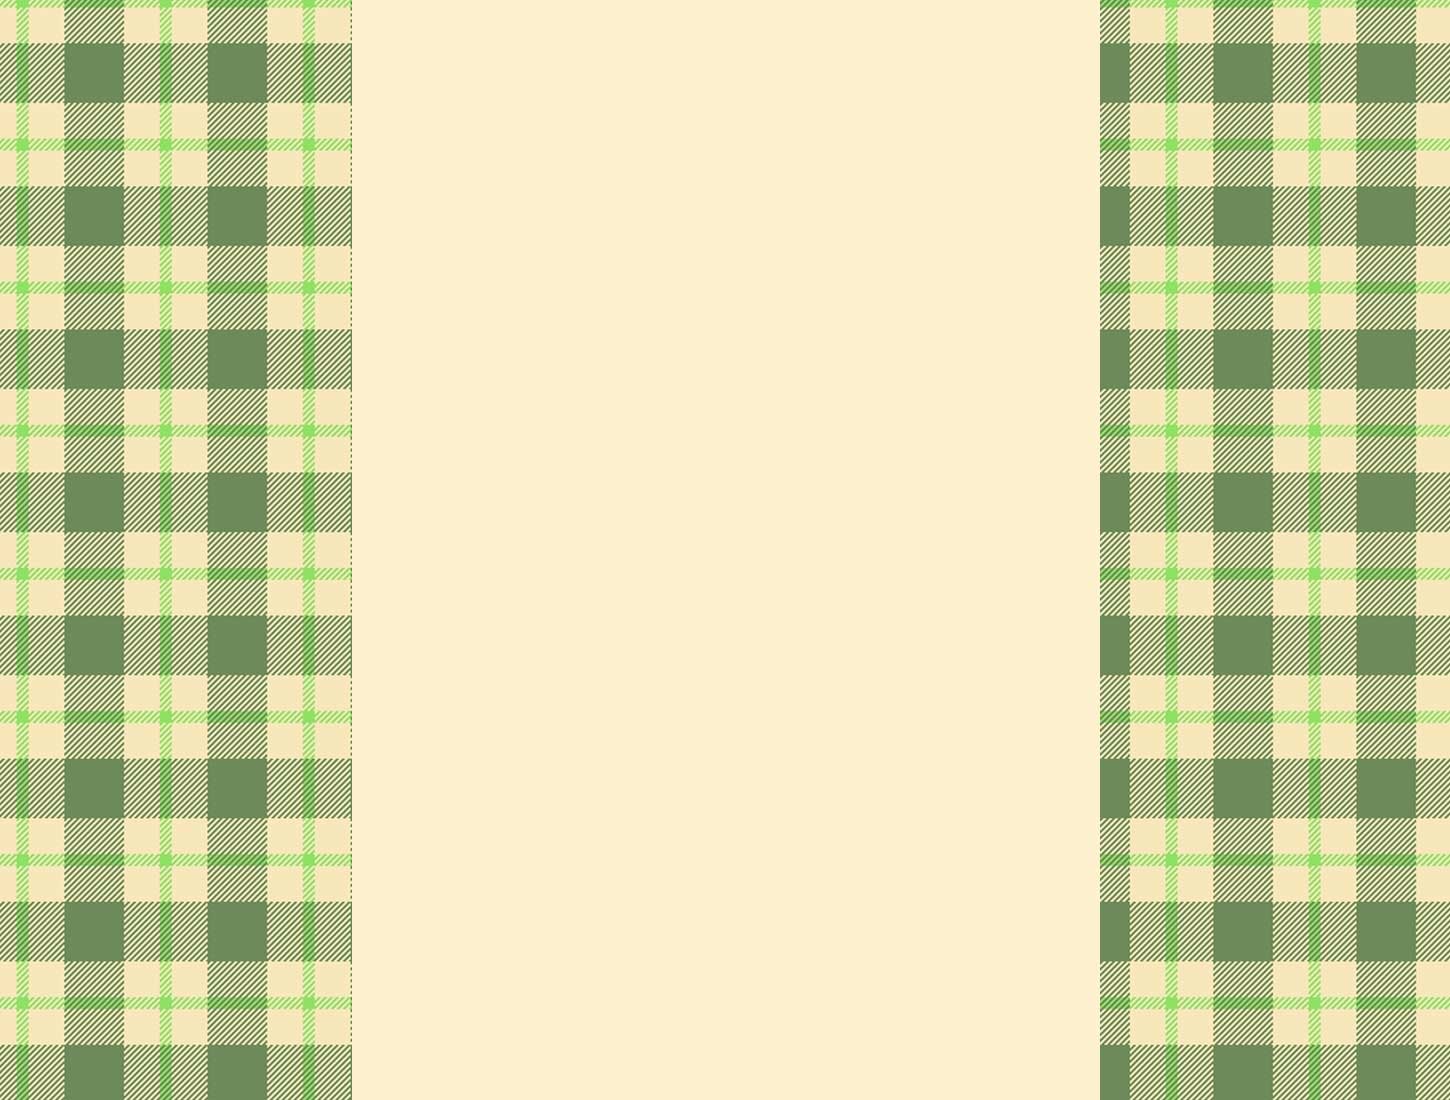 Free Green Plaidtartan Backgrounds For PowerPoint   Border and Frame 1450x1100